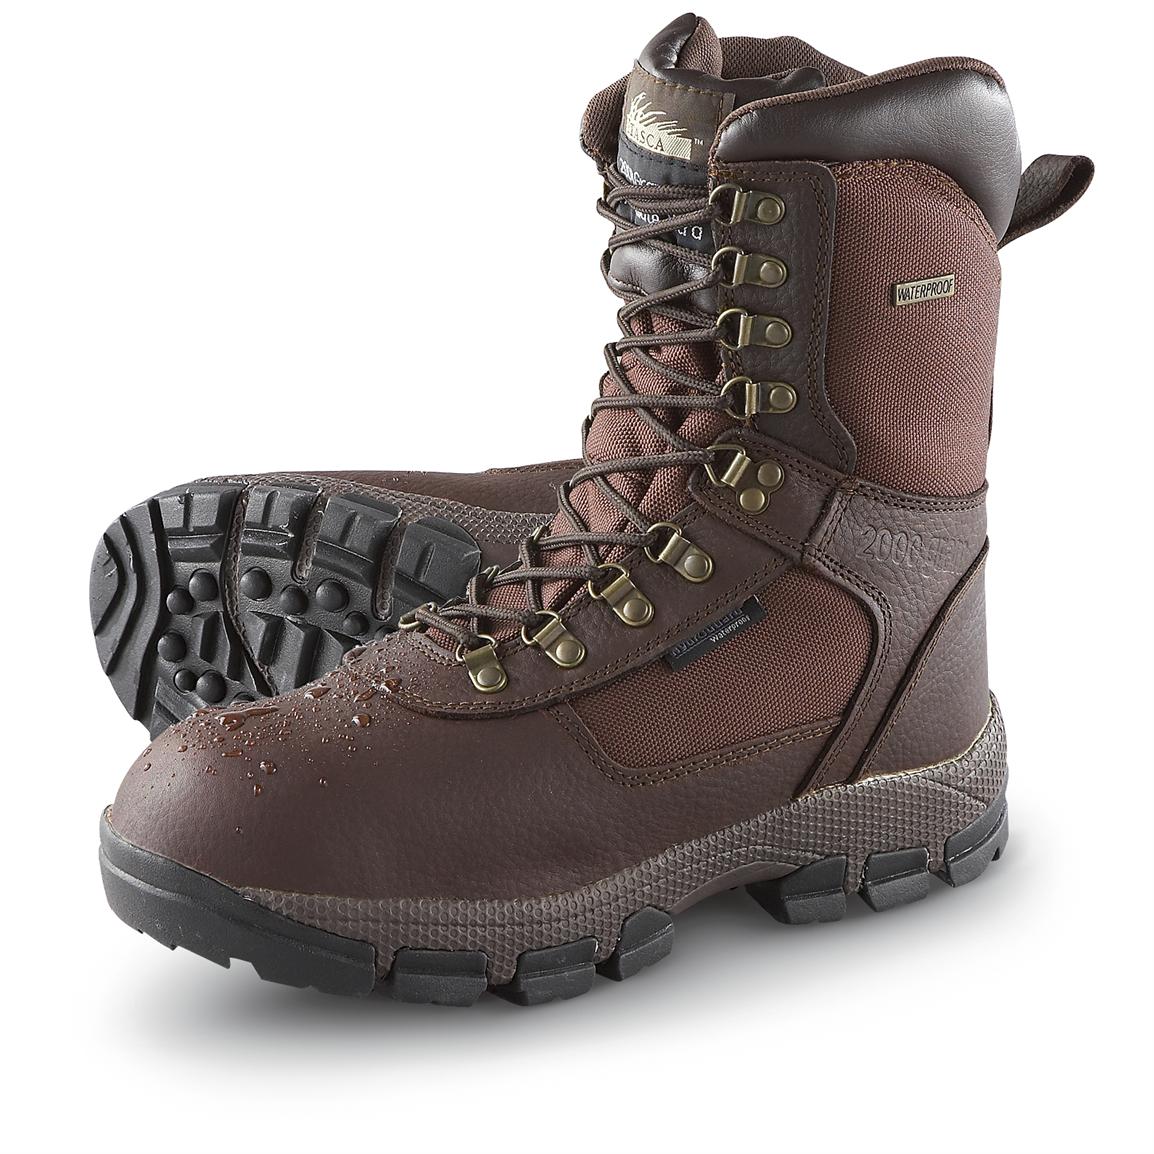 Men's Waterproof Itasca™ Cheyenne Boots with 2,000 gram Thinsulate ...